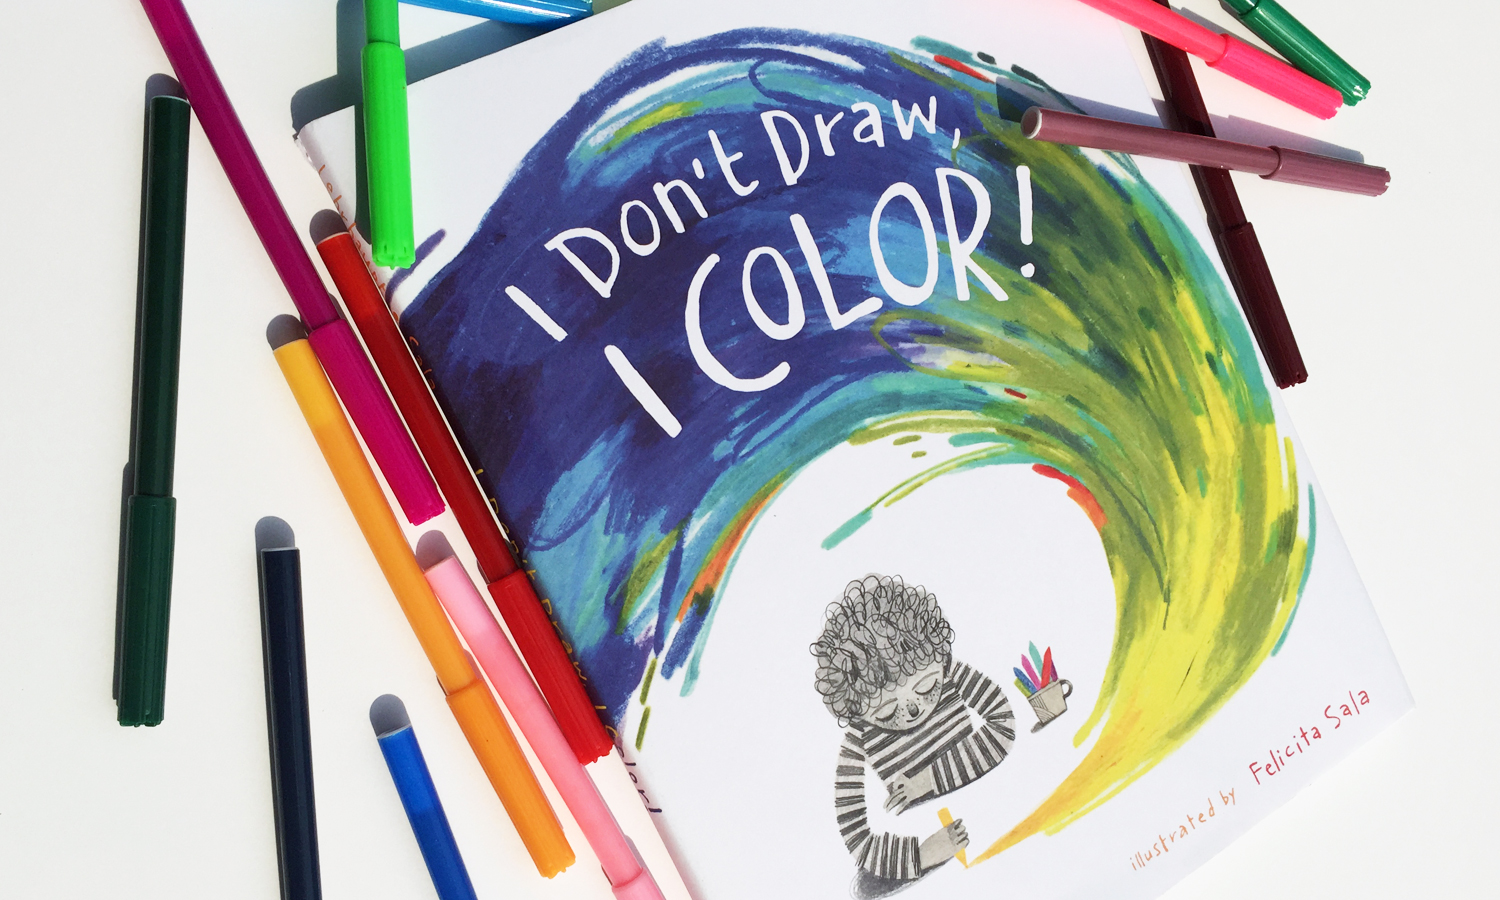 I Don't Draw, I Color! and 7 other books our children are reading this month.